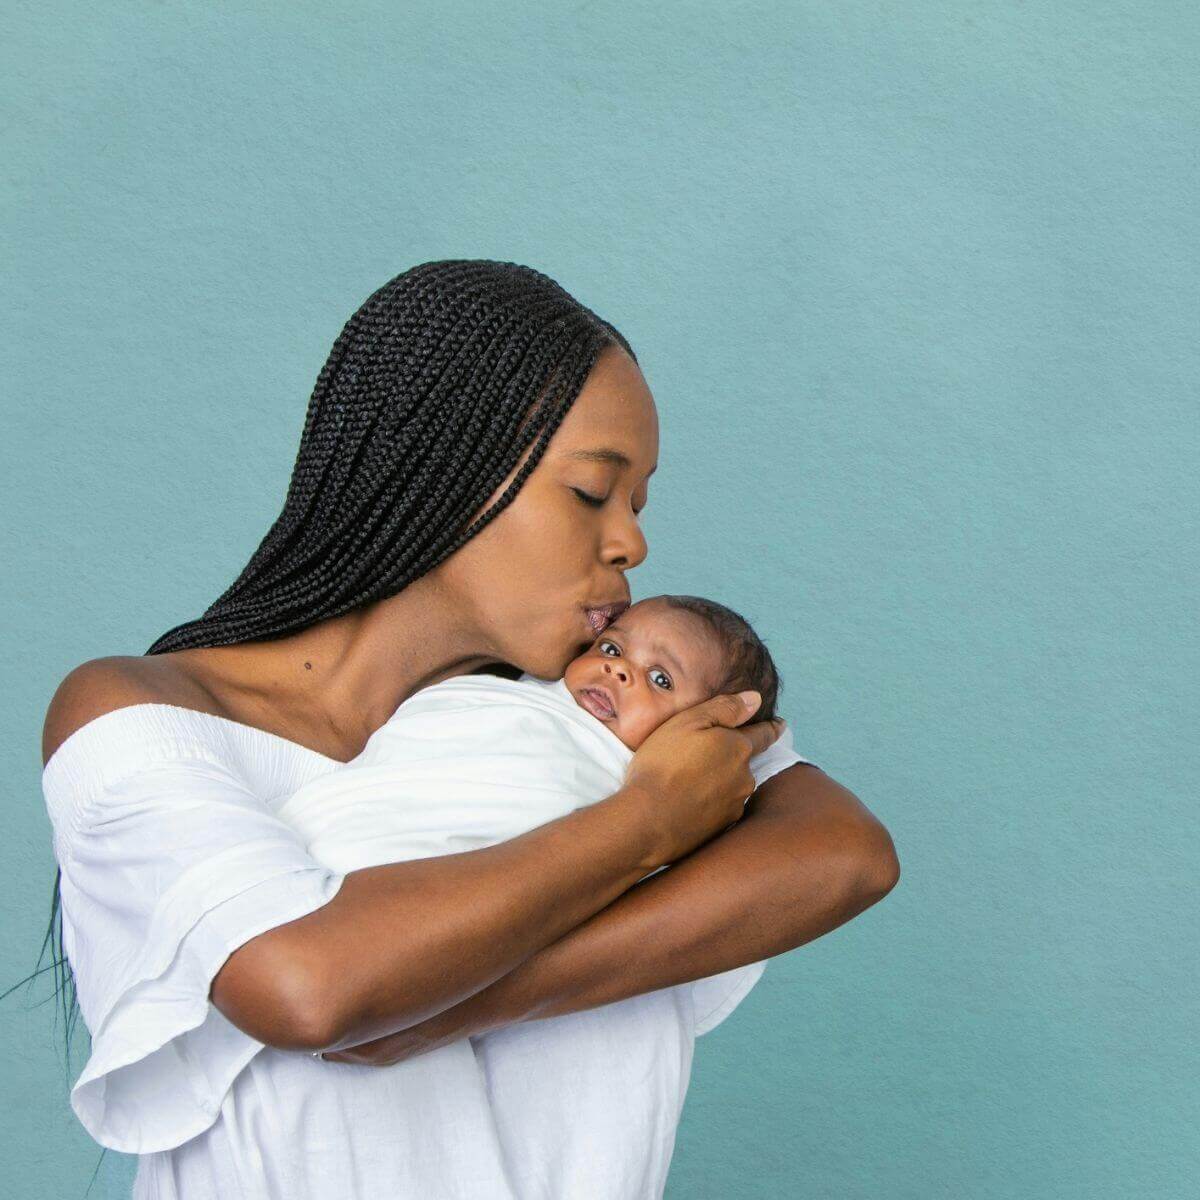 African American woman against a light blue background wearing a white shirt and kissing the heads of a newborn baby wrapped in a white blanket.